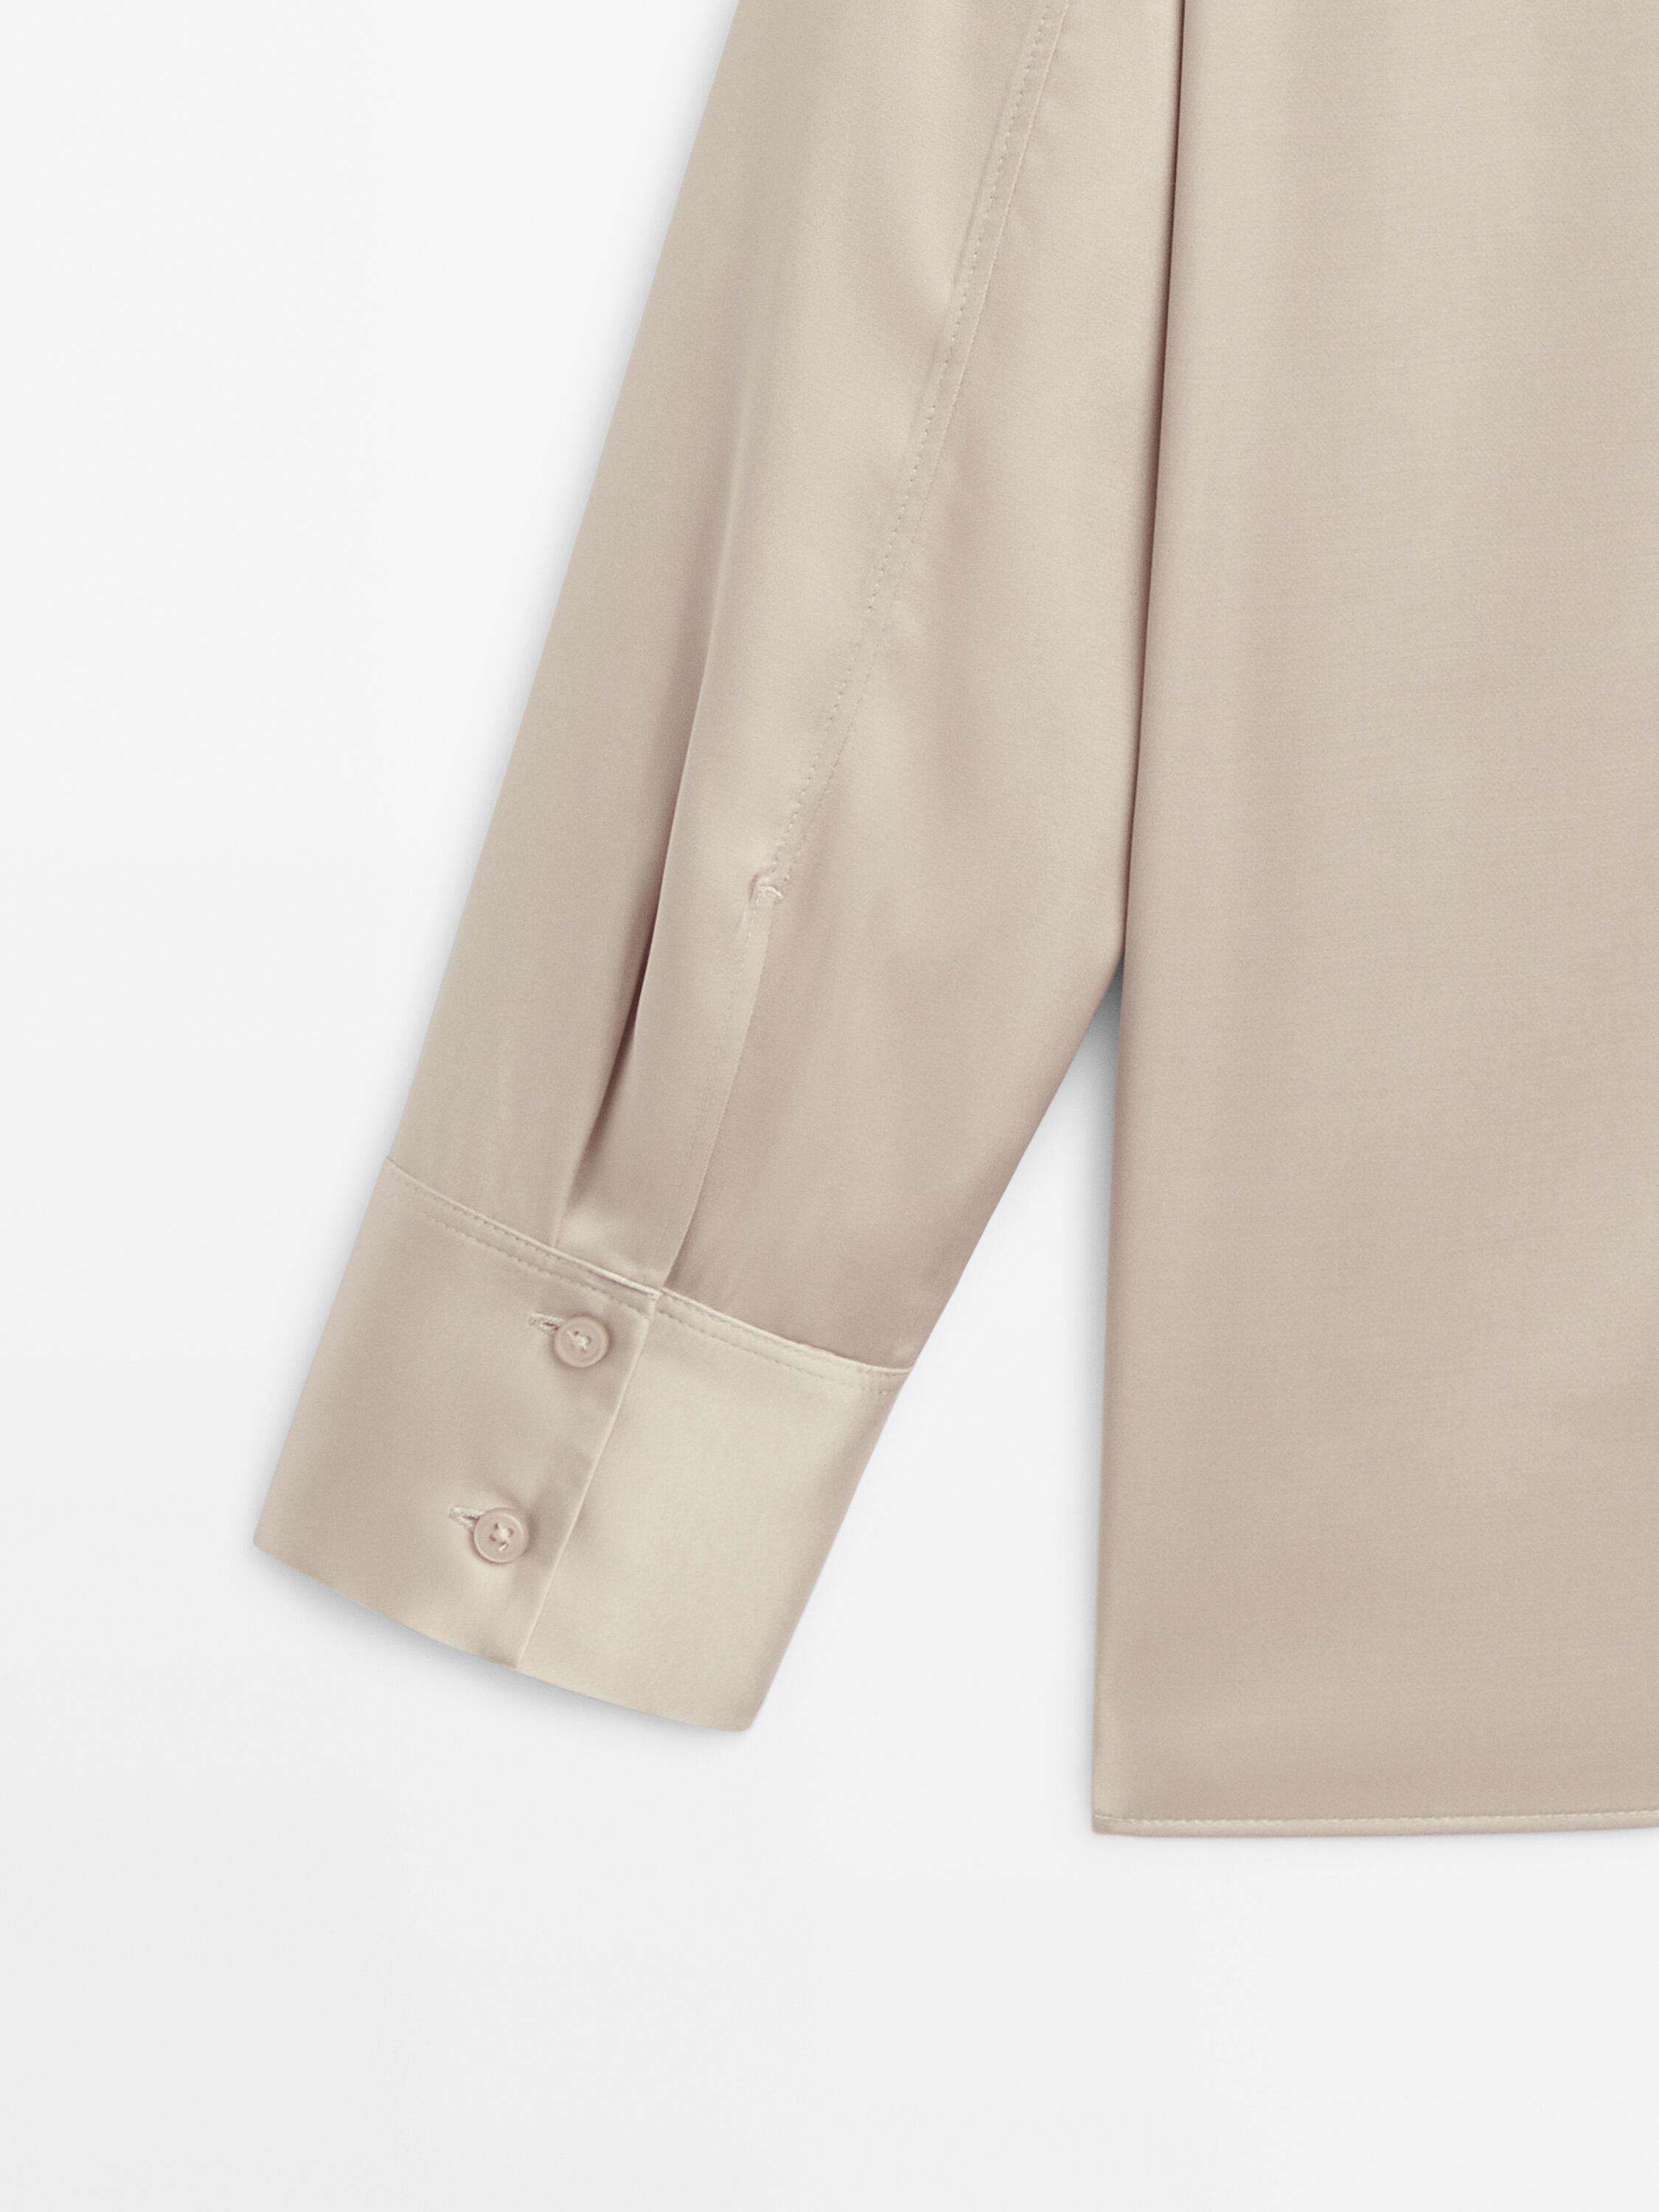 Satin shirt with cut-out details